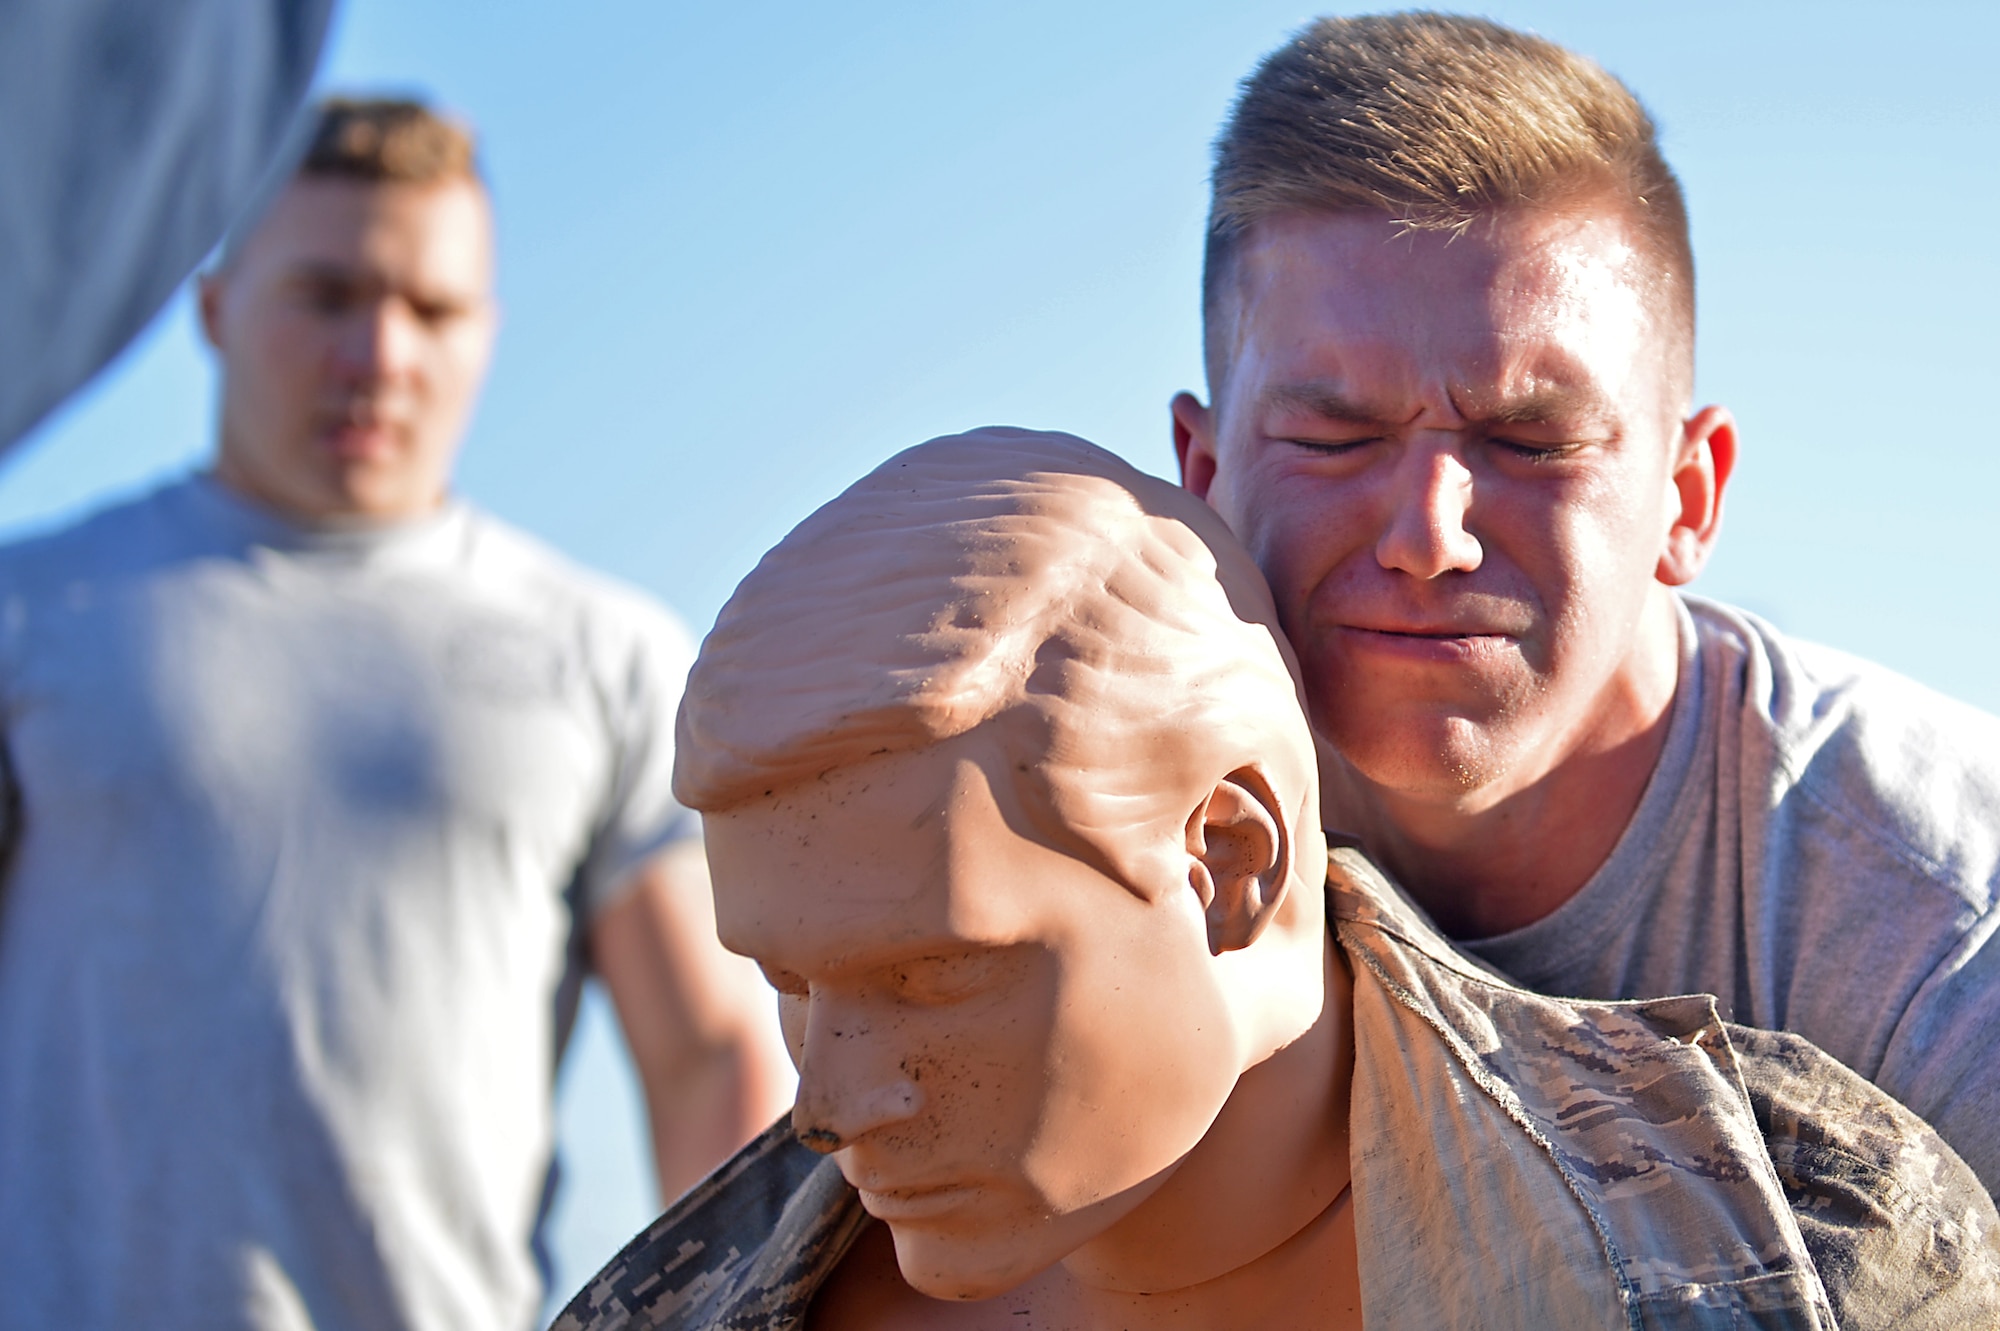 A U.S. Airman assigned to the 20th Civil Engineer Squadron transports a simulated injured wingman during a Firefighter Combat Challenge 5K run at Shaw Air Force Base, S.C., Nov. 18, 2016. Participants were tasked with transporting the almost 250 pound mannequin approximately 100 meters. (U.S. Air Force photo by Airman 1st Class Christopher Maldonado)